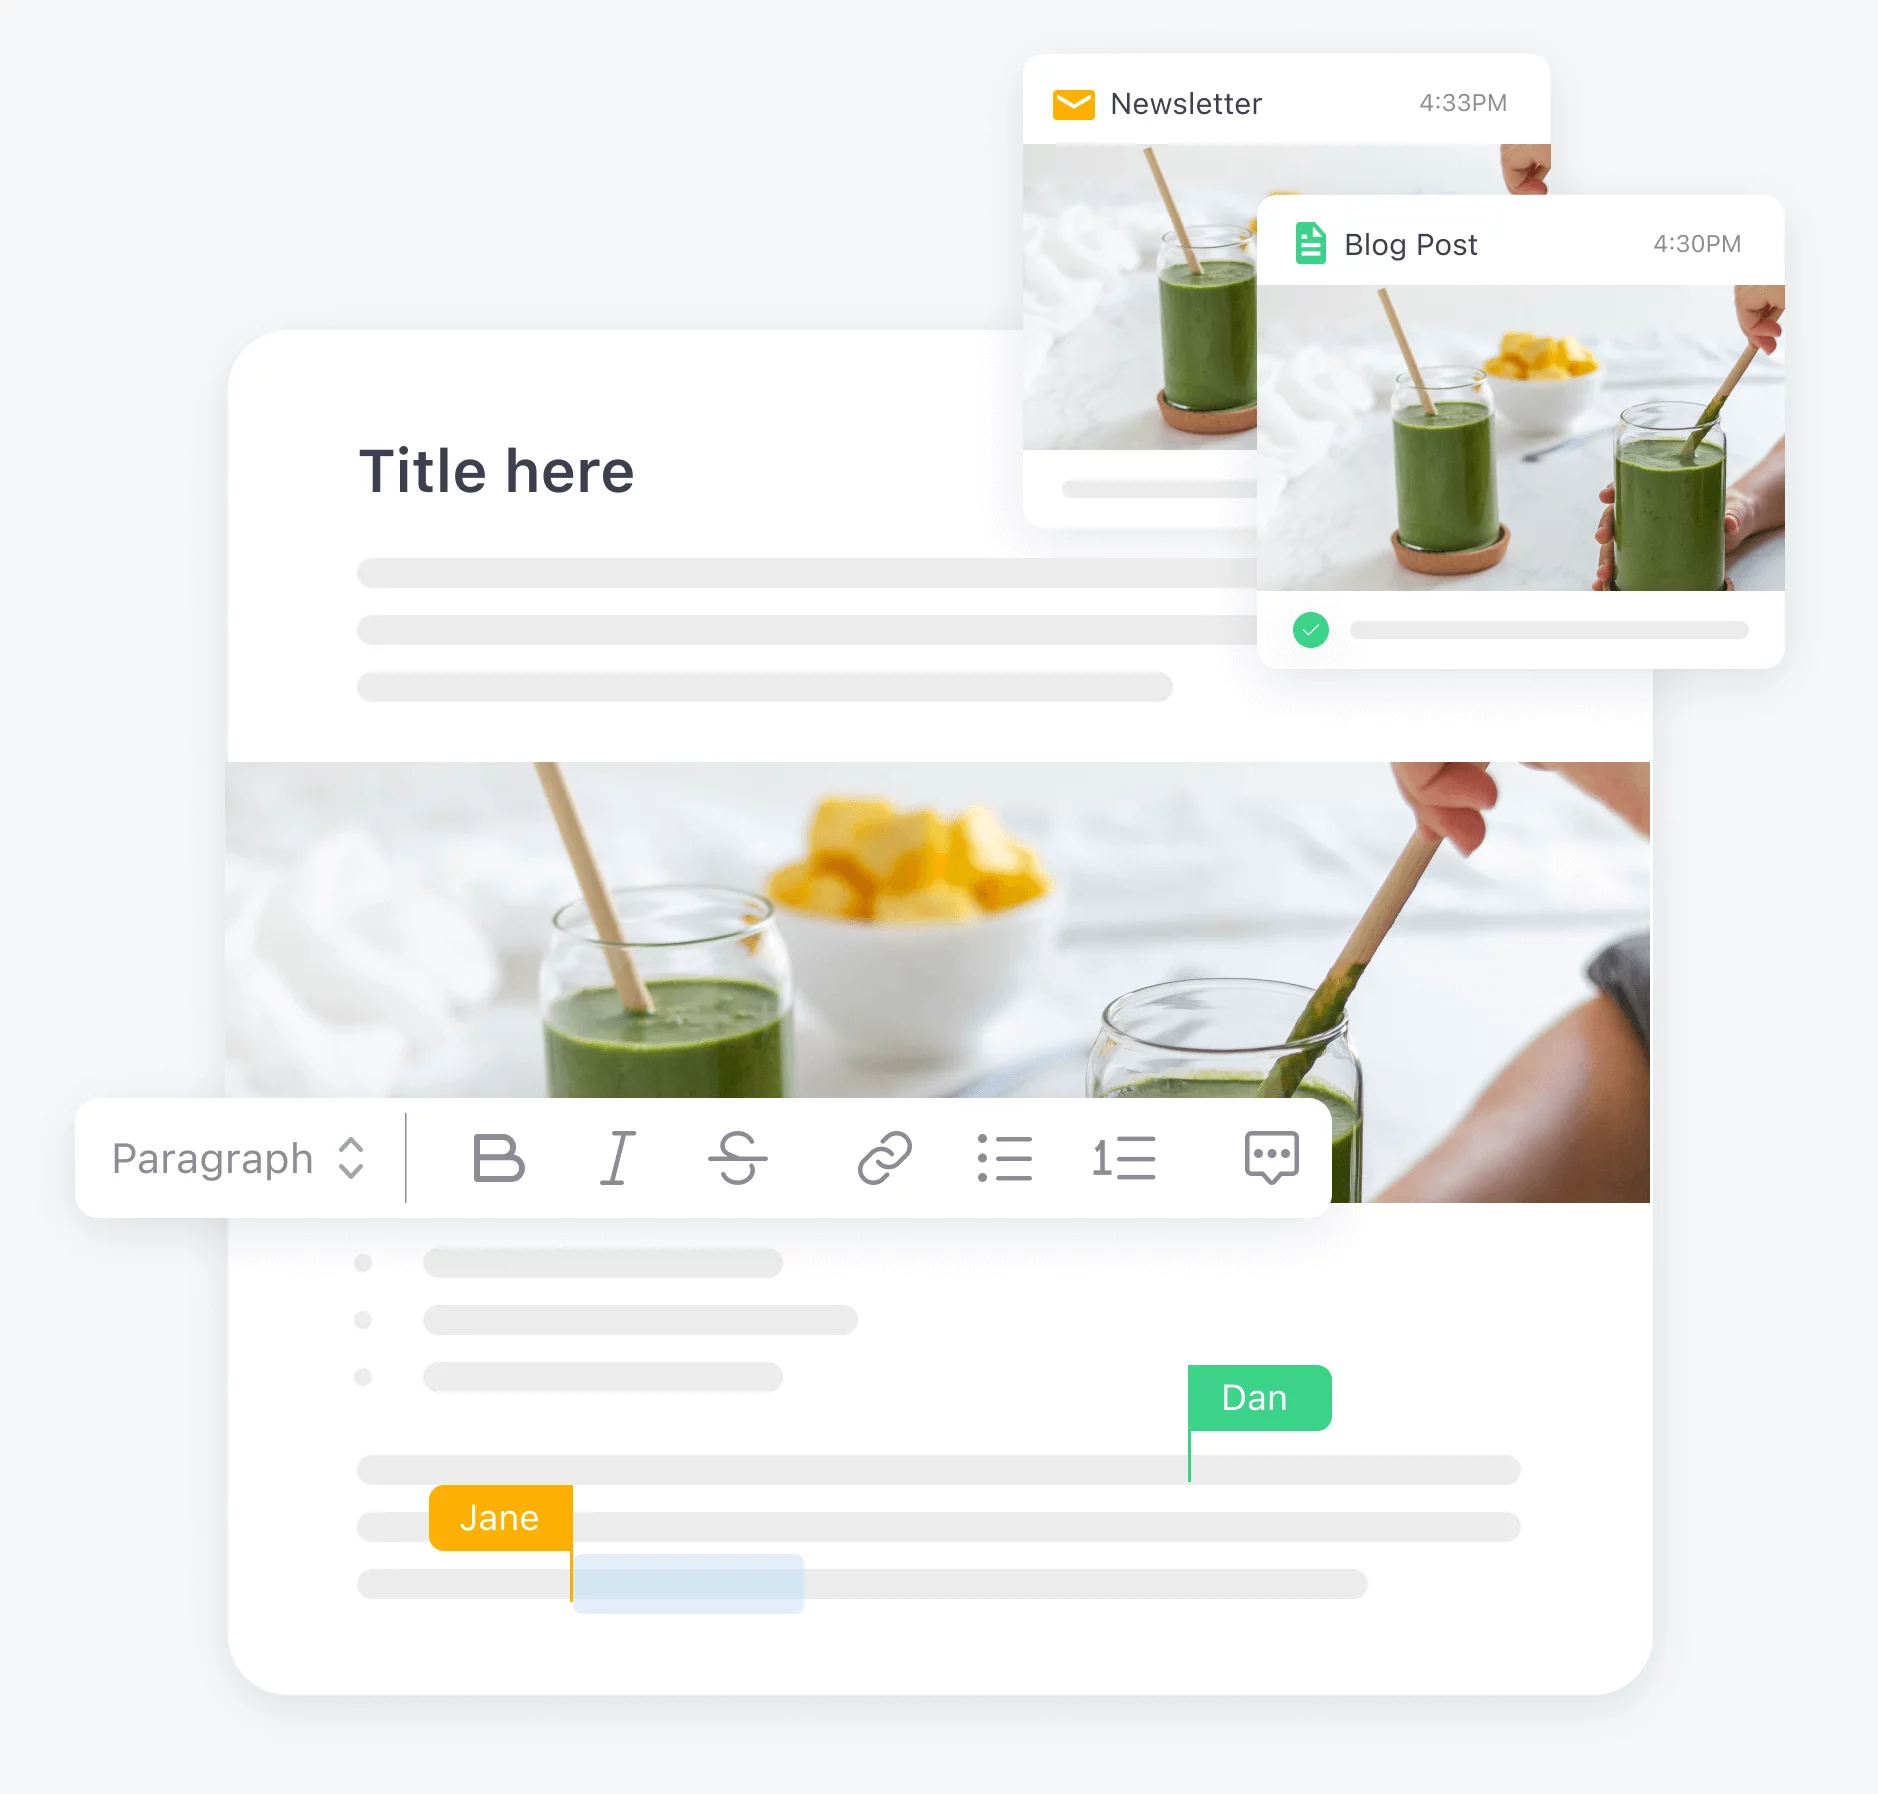 Planable's document editor showing collaboration features with image of green smoothies and editing tools for newsletters and blog posts.